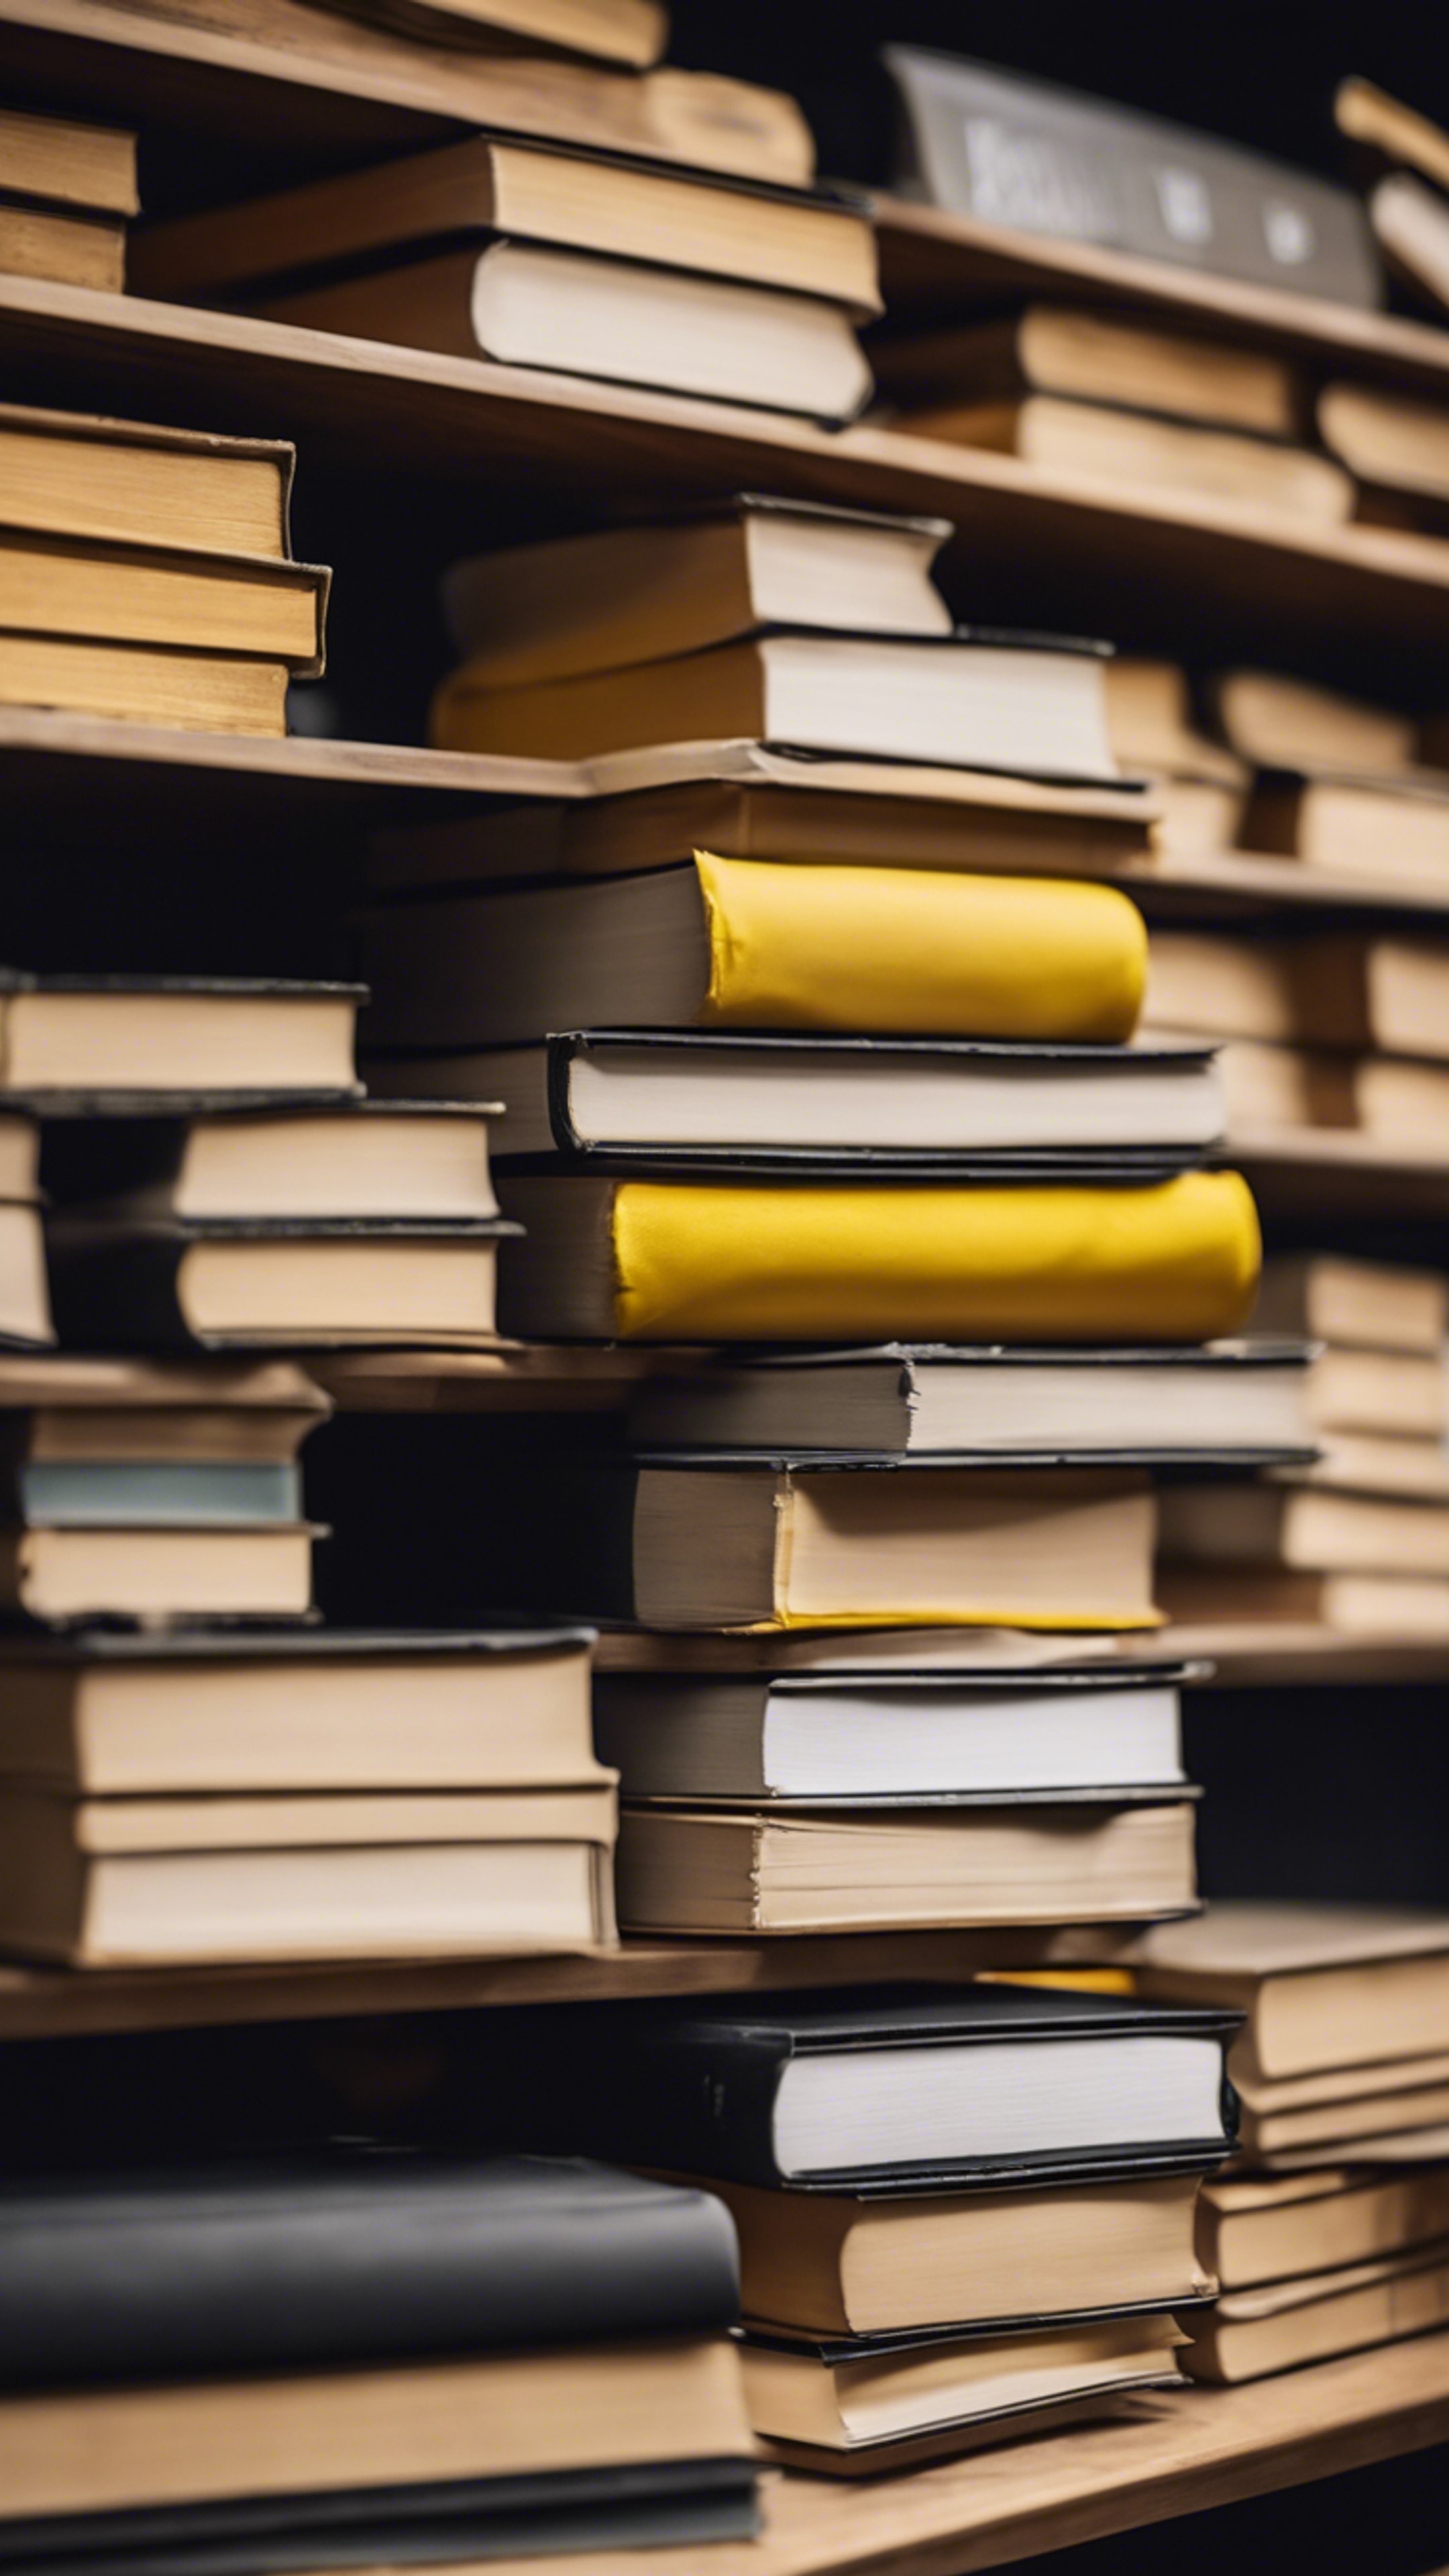 A stack of books with black and yellow covers neatly arranged on a wooden shelf. Wallpaper[a88d8d79a08f4734ad7e]